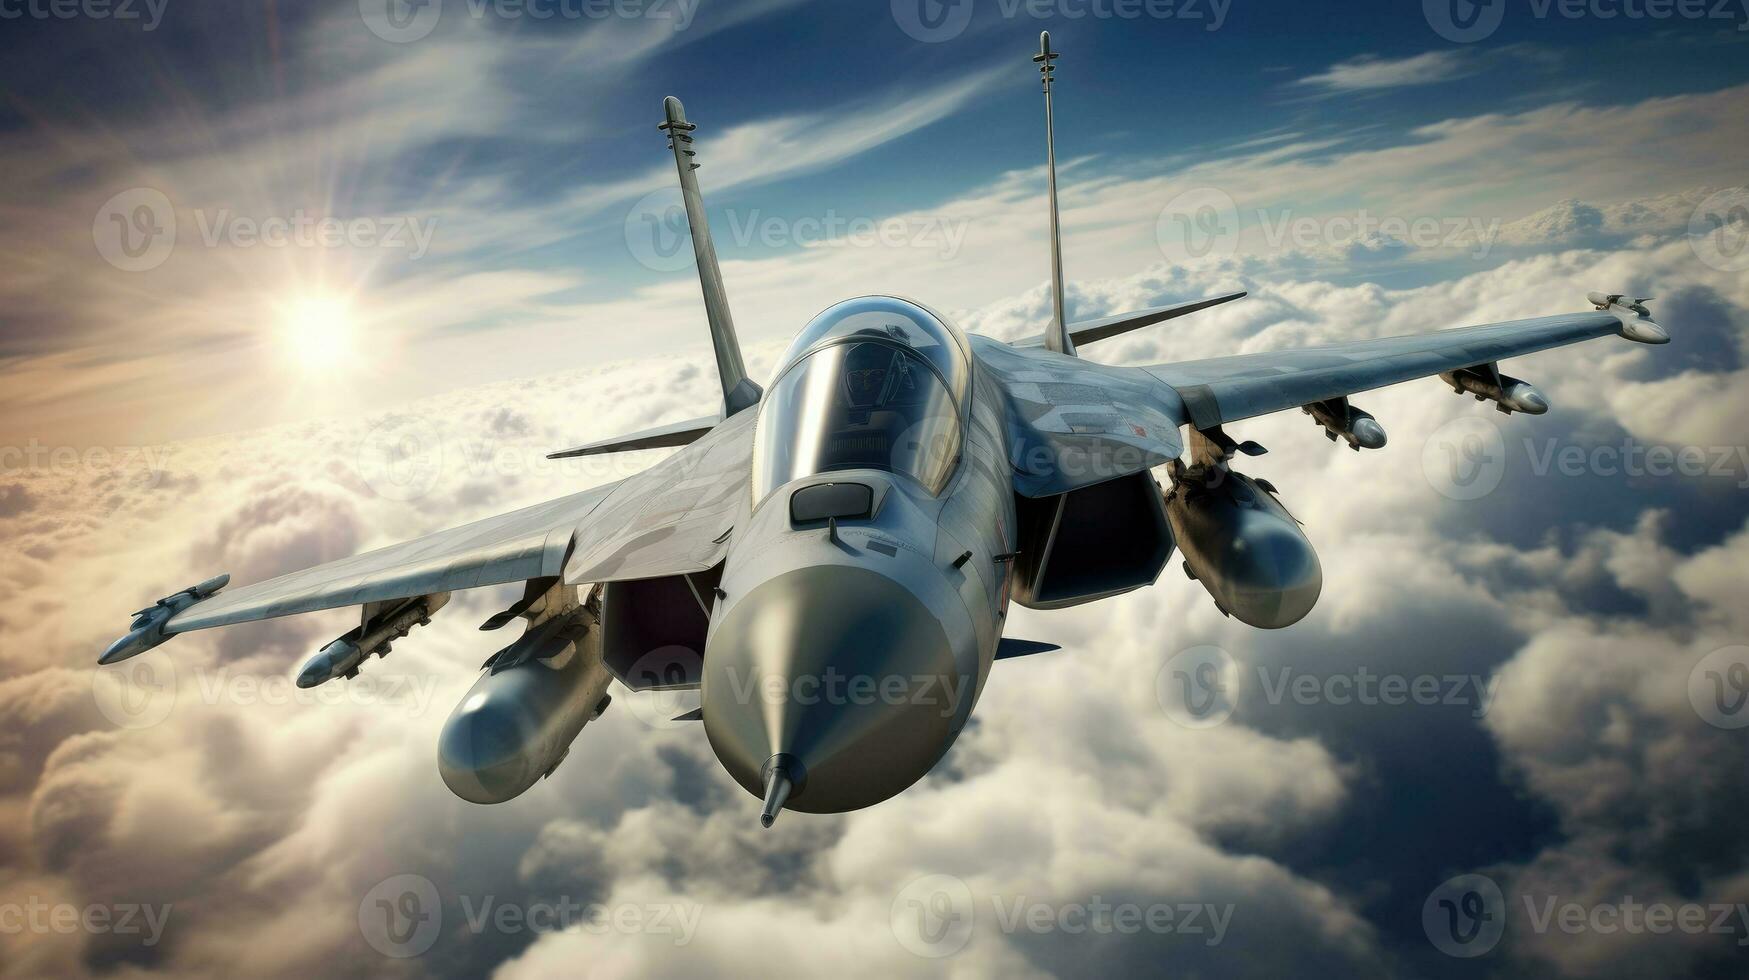 A military image of a fighter jet soaring through the clouds, intense motion blur on the wings, cockpit visible with the pilot's determined expression, weapons systems armed and ready, photo